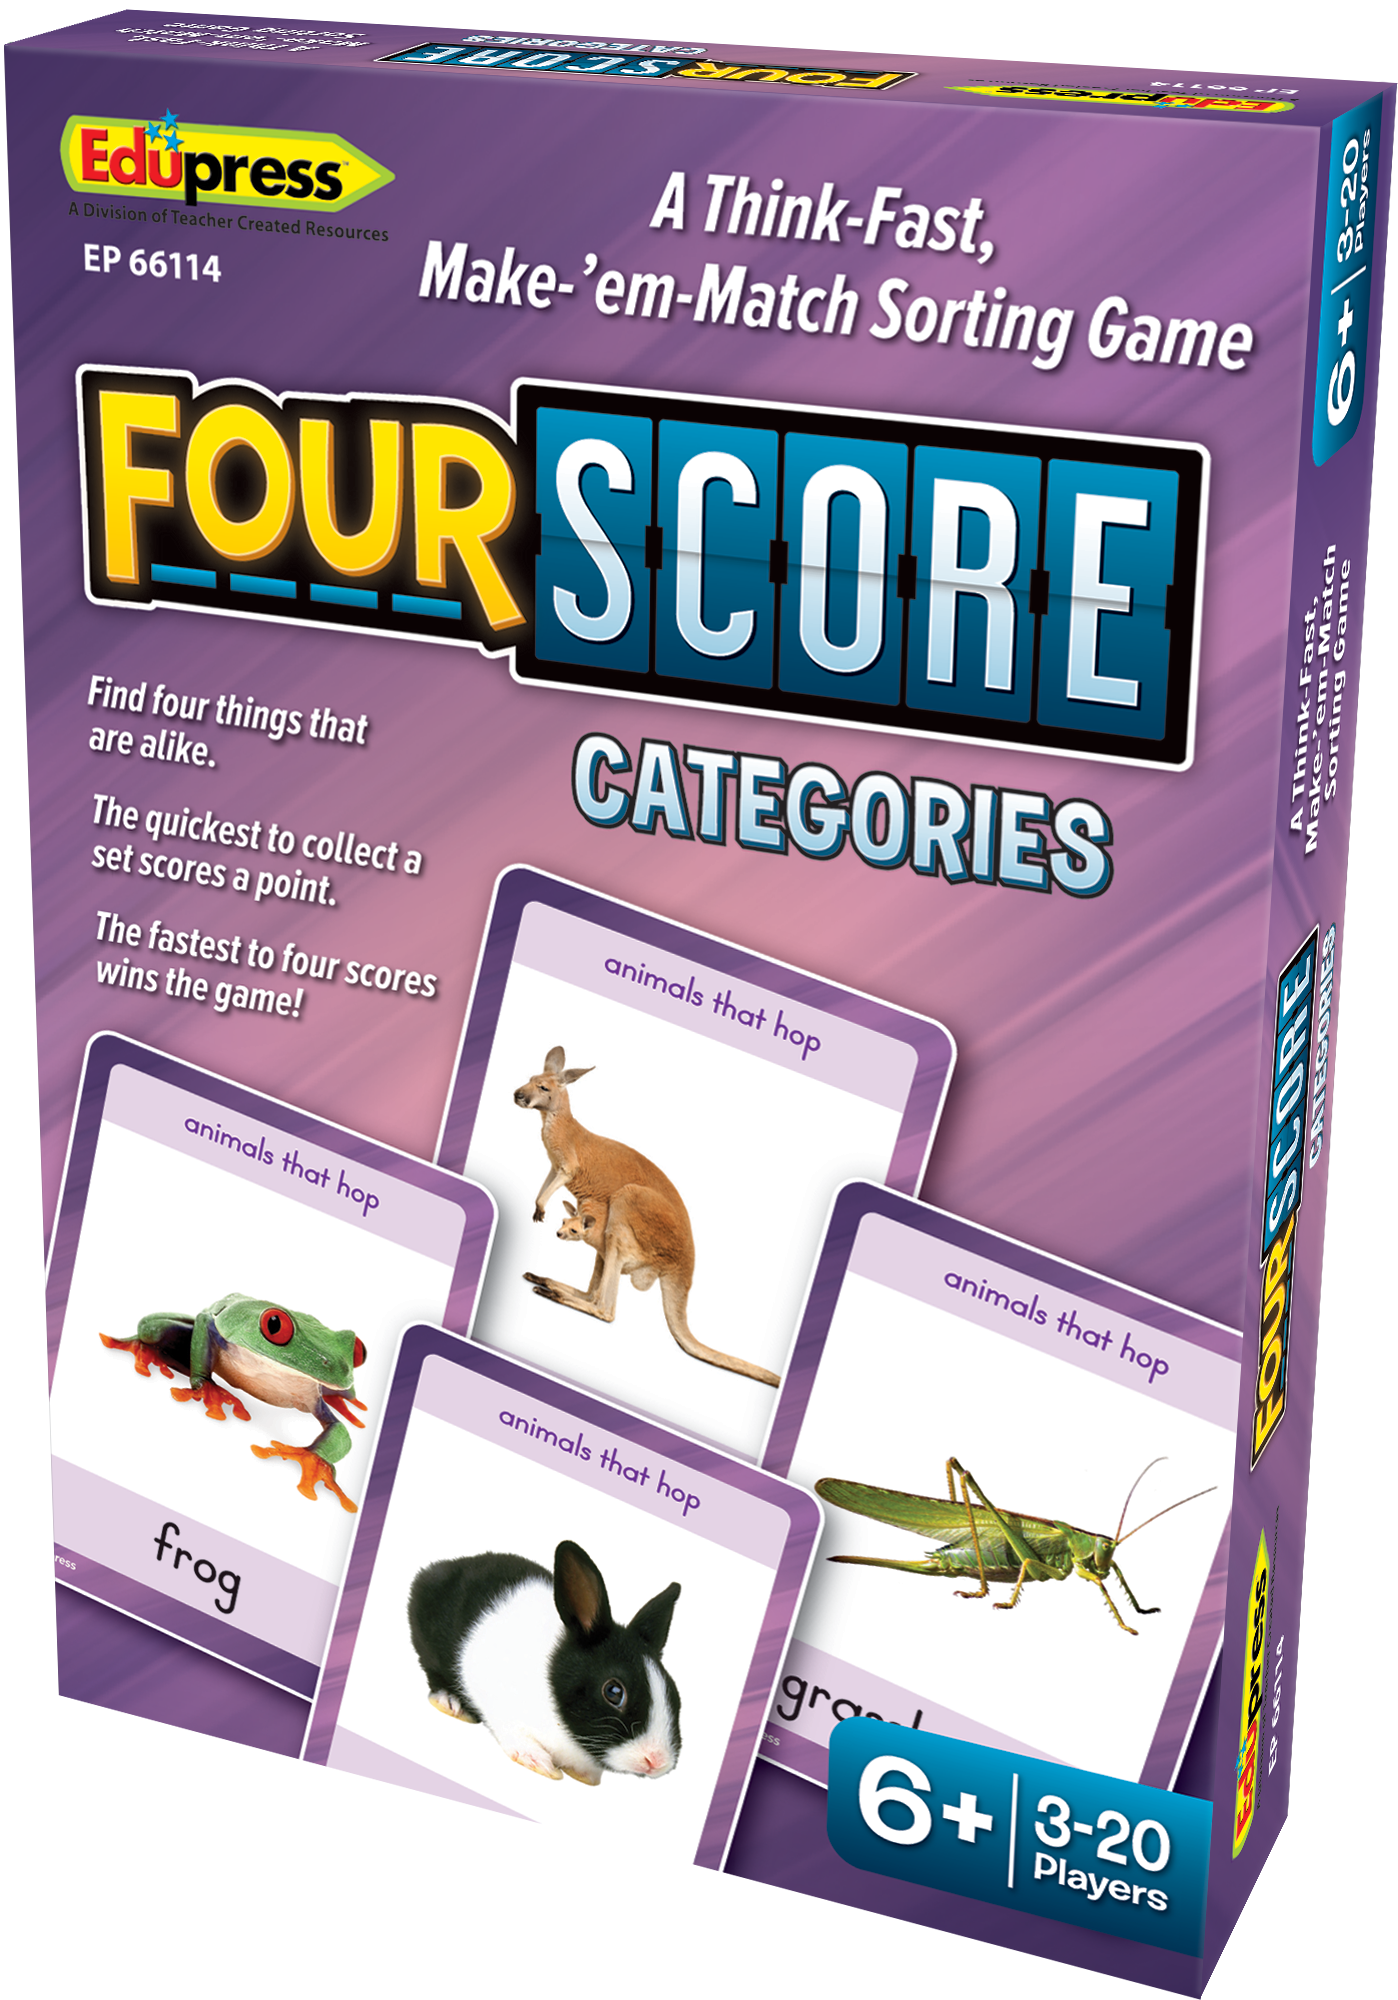 Players can practice categorization with this edition of Four Score.